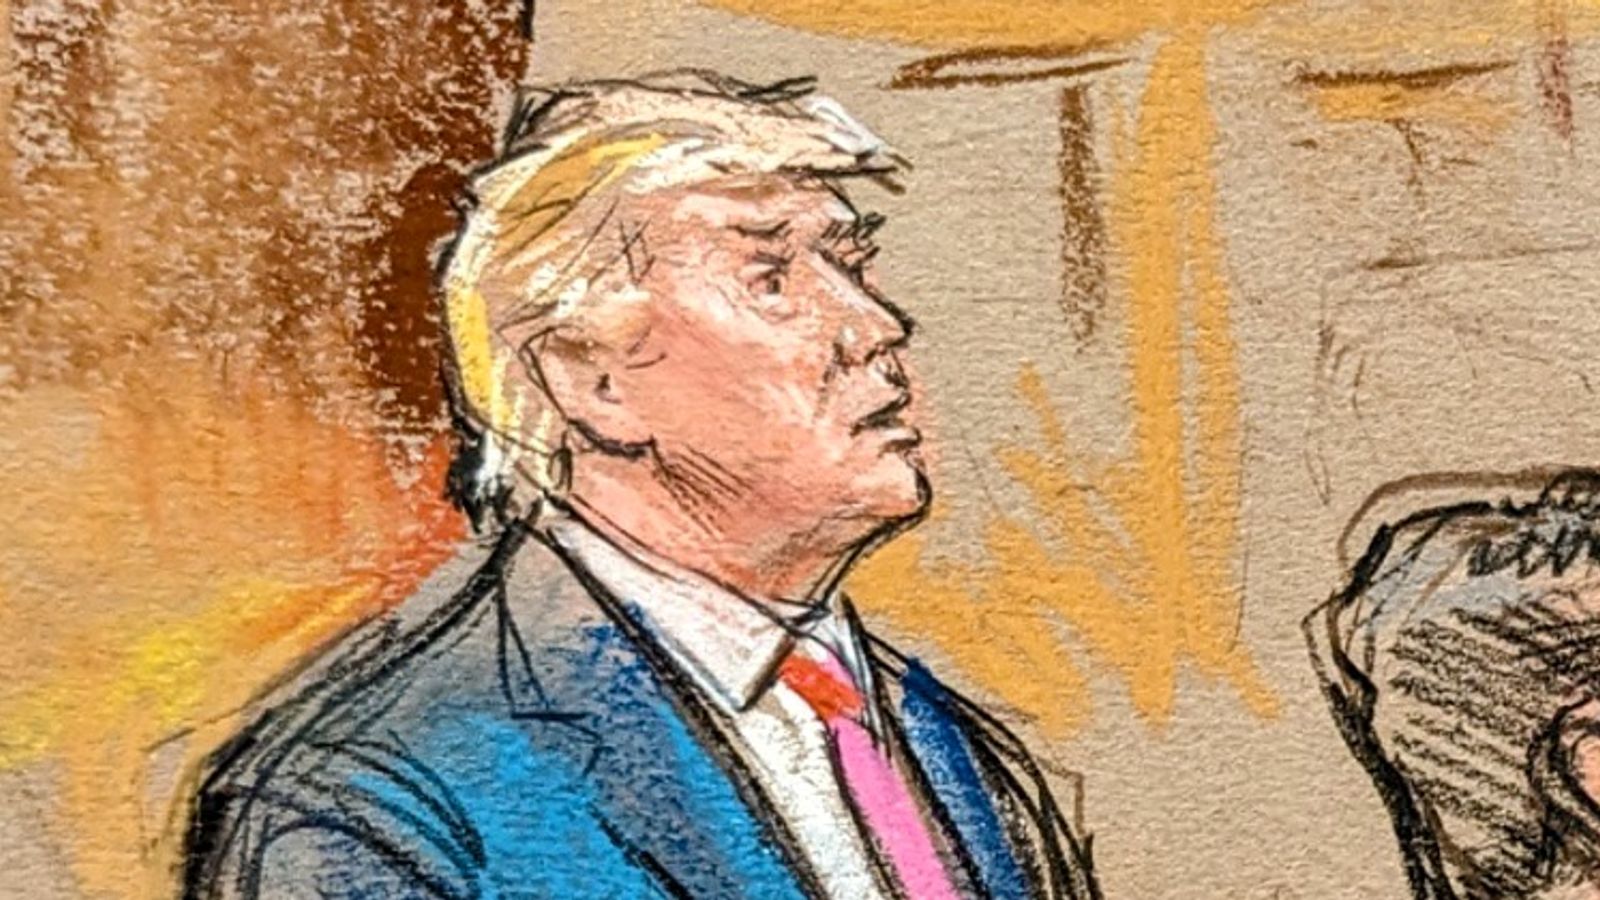 Donald Trump warns it is a 'sad day for America' as he pleads not guilty over January 6 riot, and asks supporters for cash